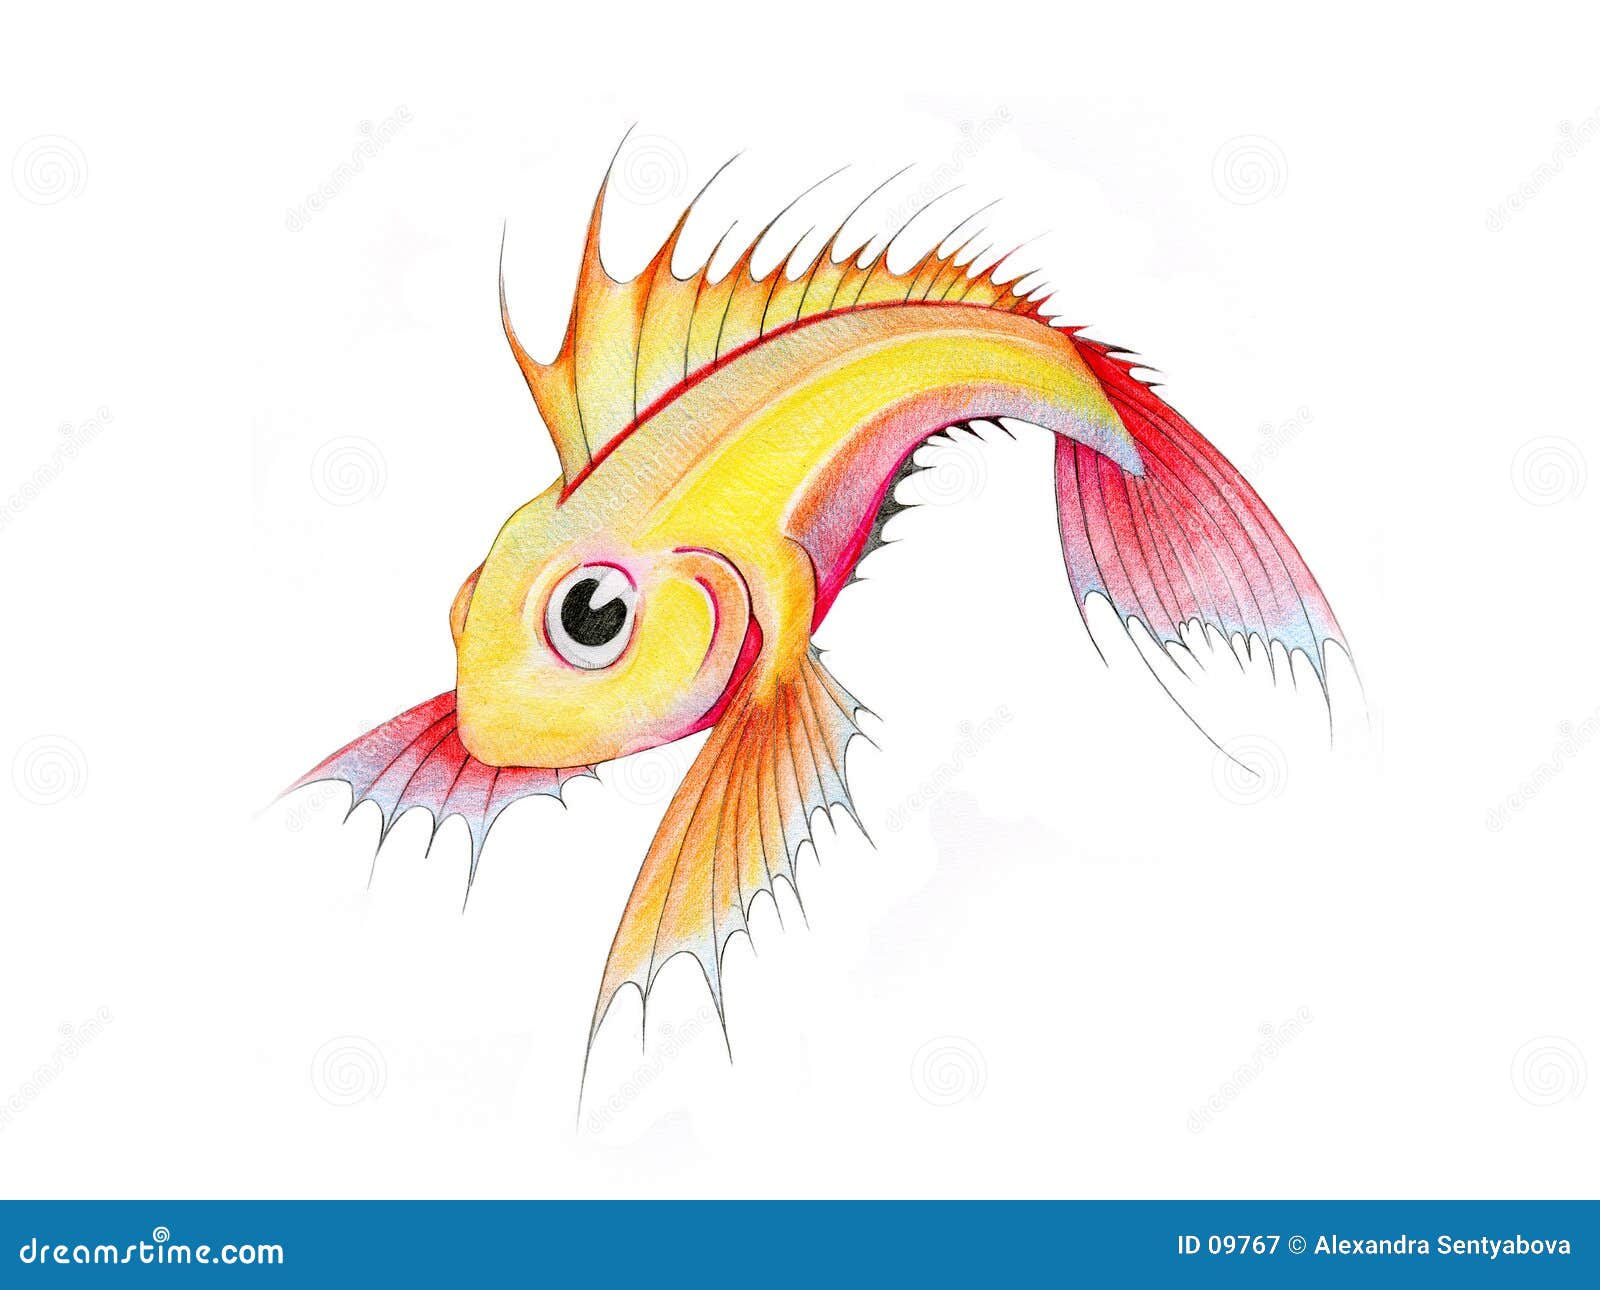 3,399 Fish Tank Drawing Images, Stock Photos, 3D objects, & Vectors |  Shutterstock